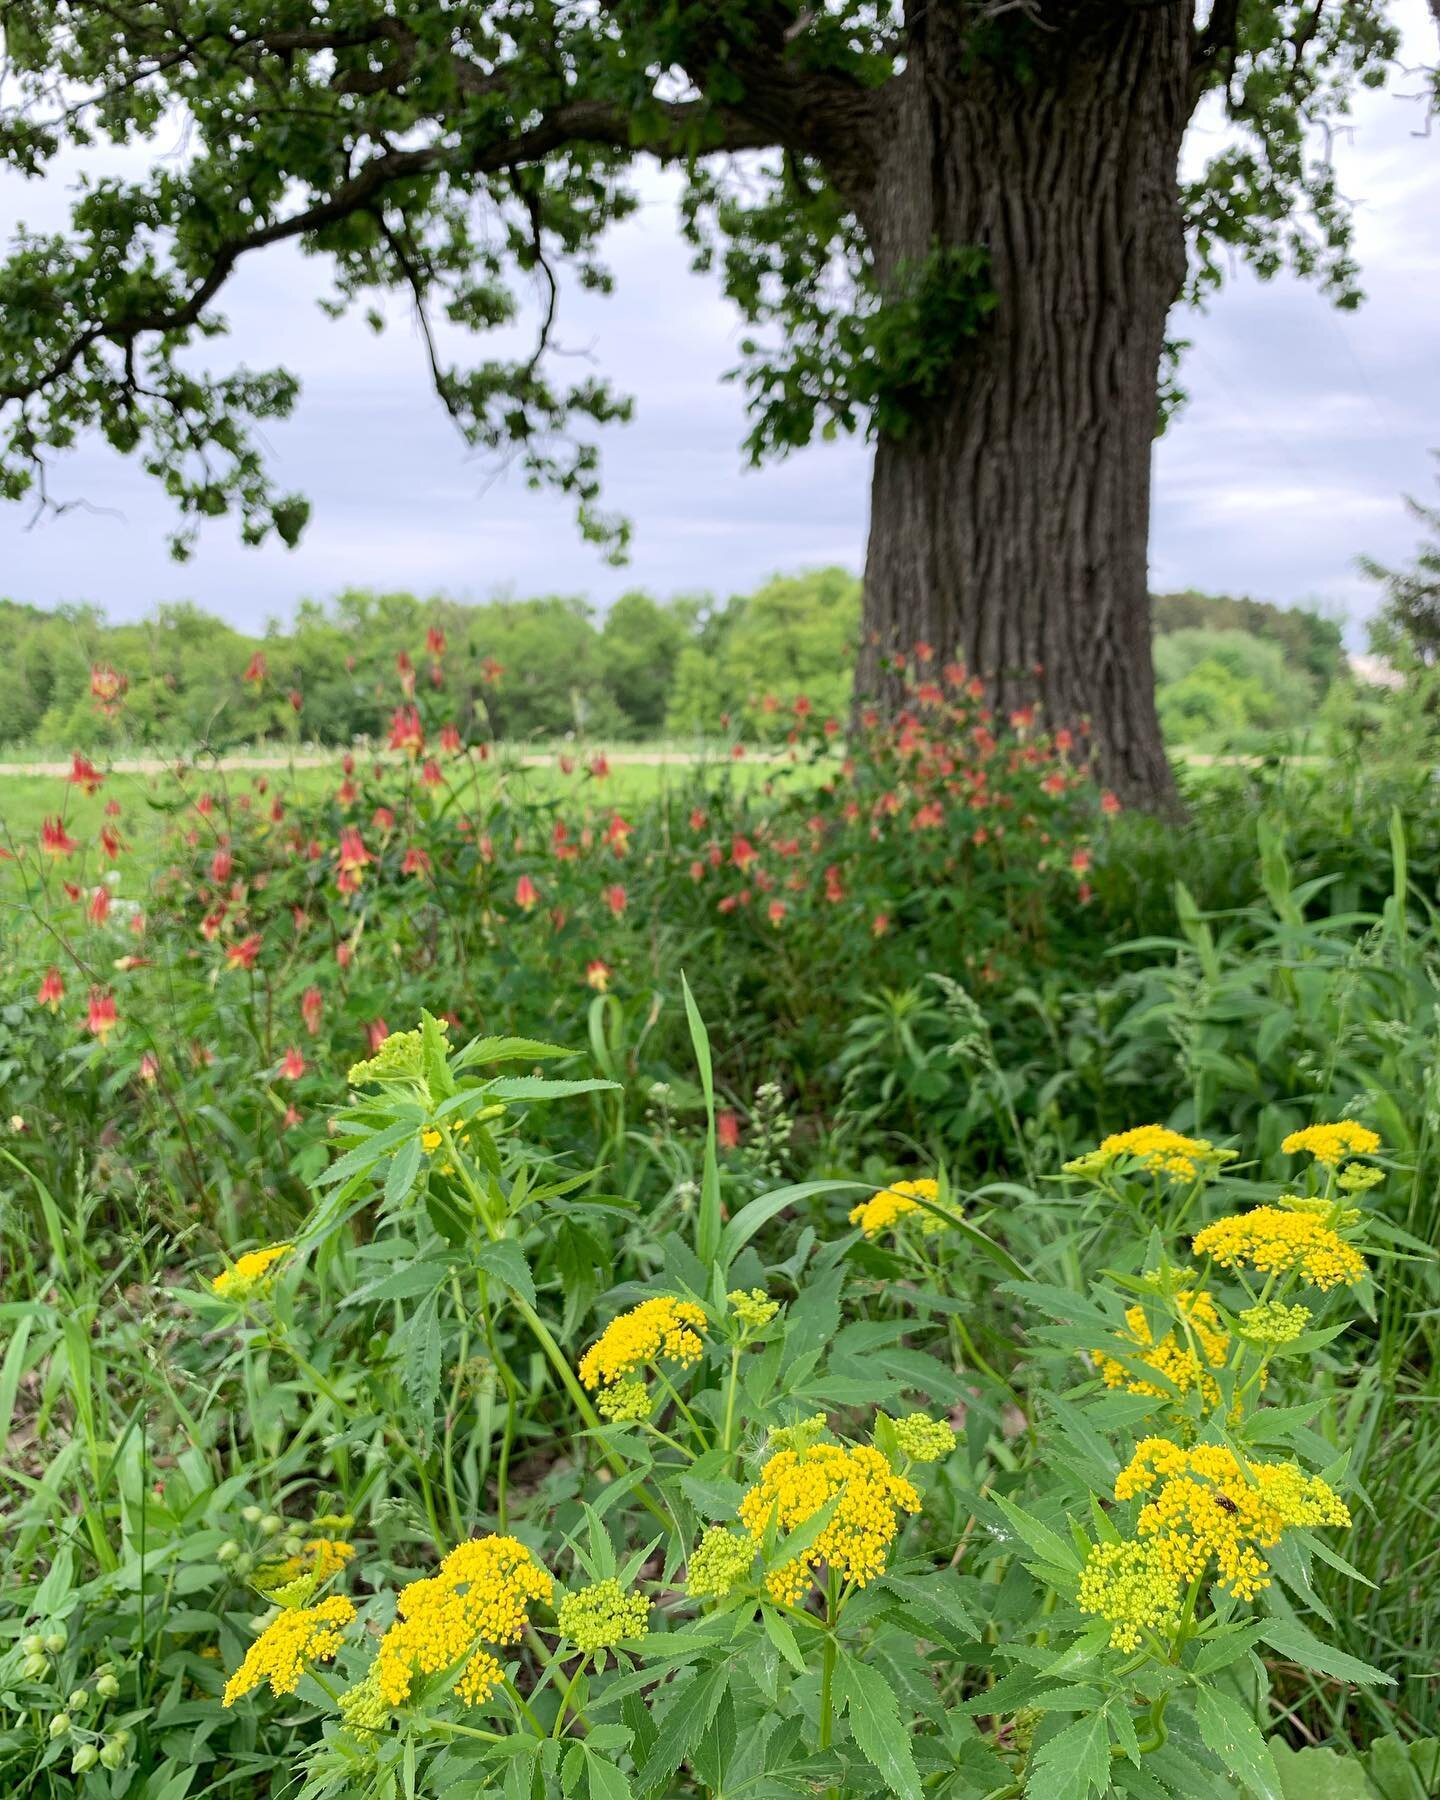 Another example of a habitat planting designed to create #softlandings for pollinators! Read more about the concept at @beesnativeplants and/or on our May 10th post. 

Also, come shop for native plants to design your own soft landings habitat at the 